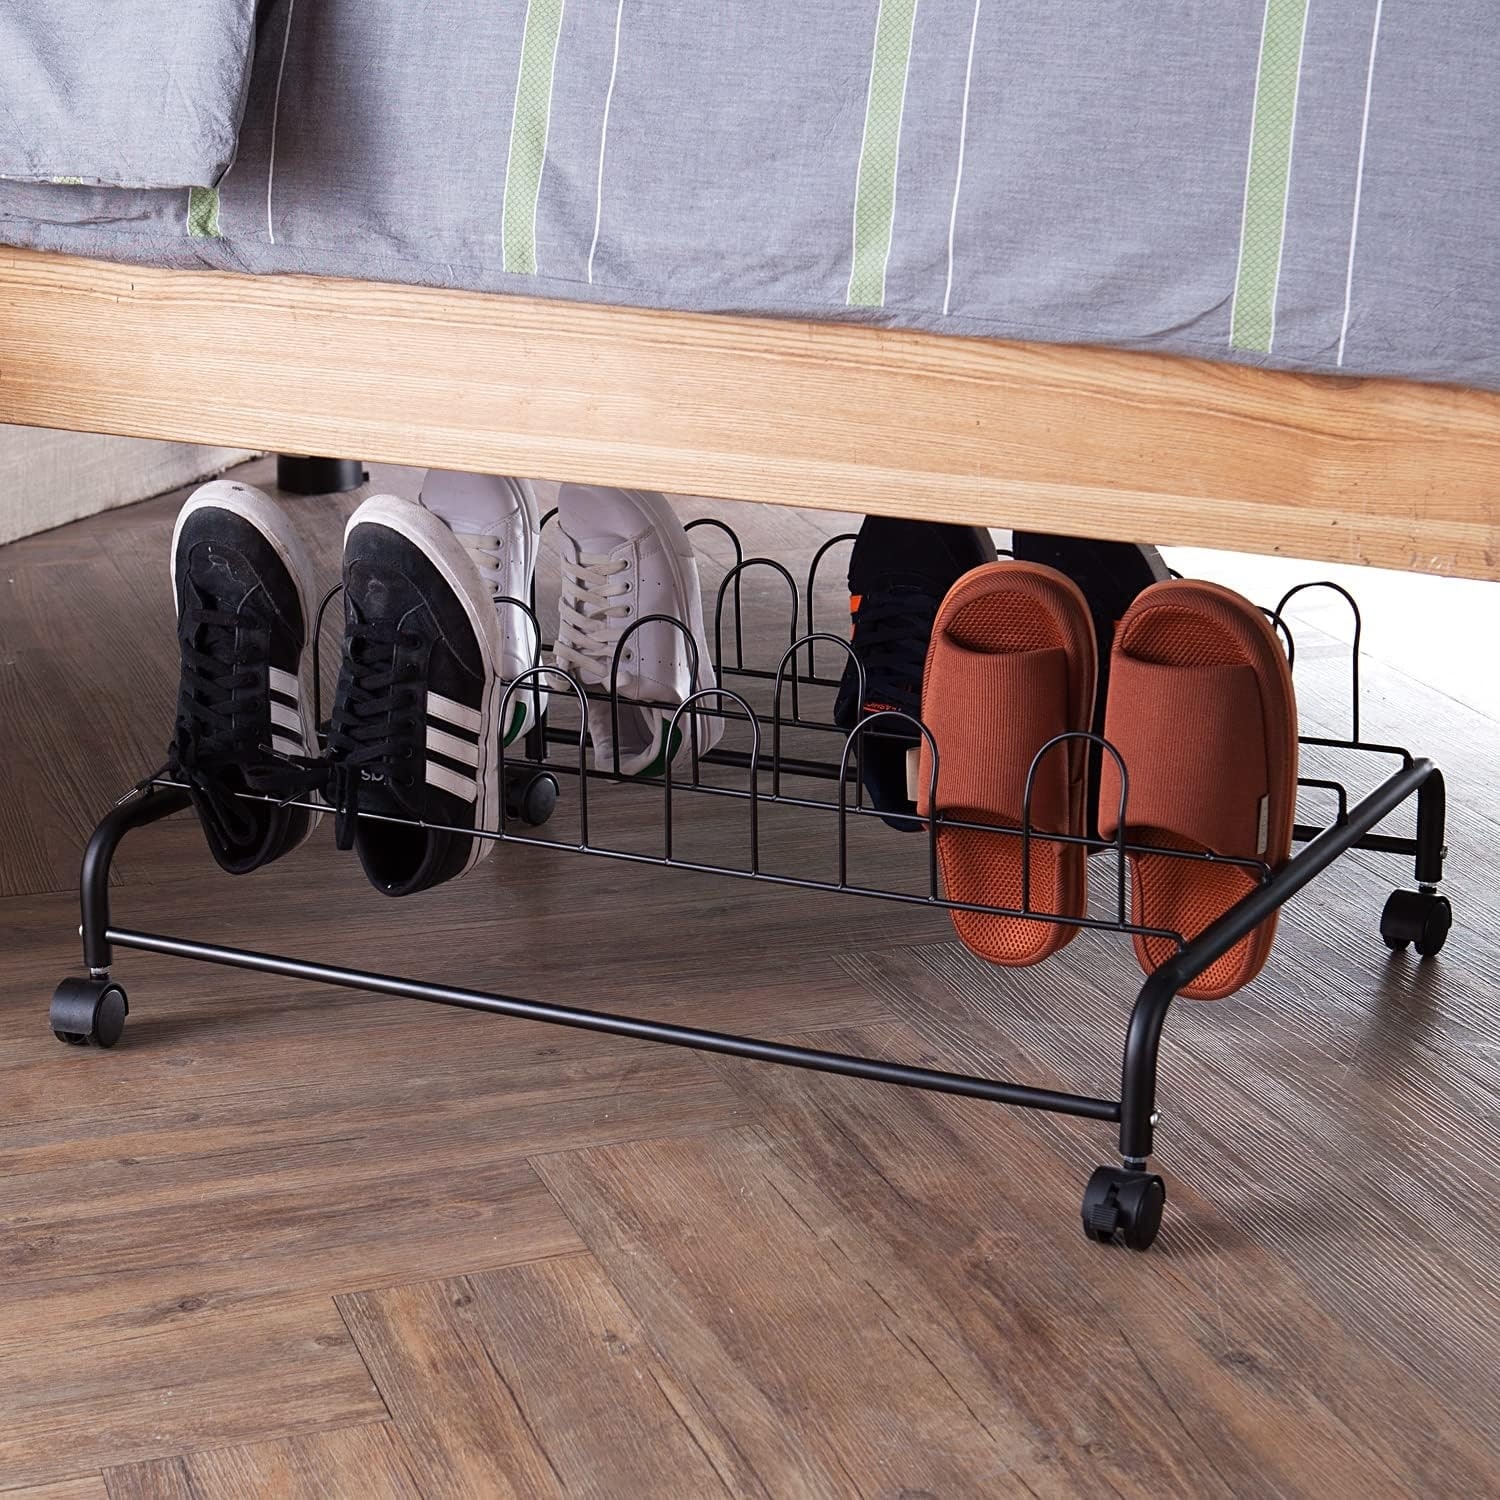 https://ak1.ostkcdn.com/images/products/is/images/direct/c884c5a6606817818780ec4313595d2aeee095eb/Suprima-Stainless-Steel-Rolling-Underbed-Shoe-Holder.jpg